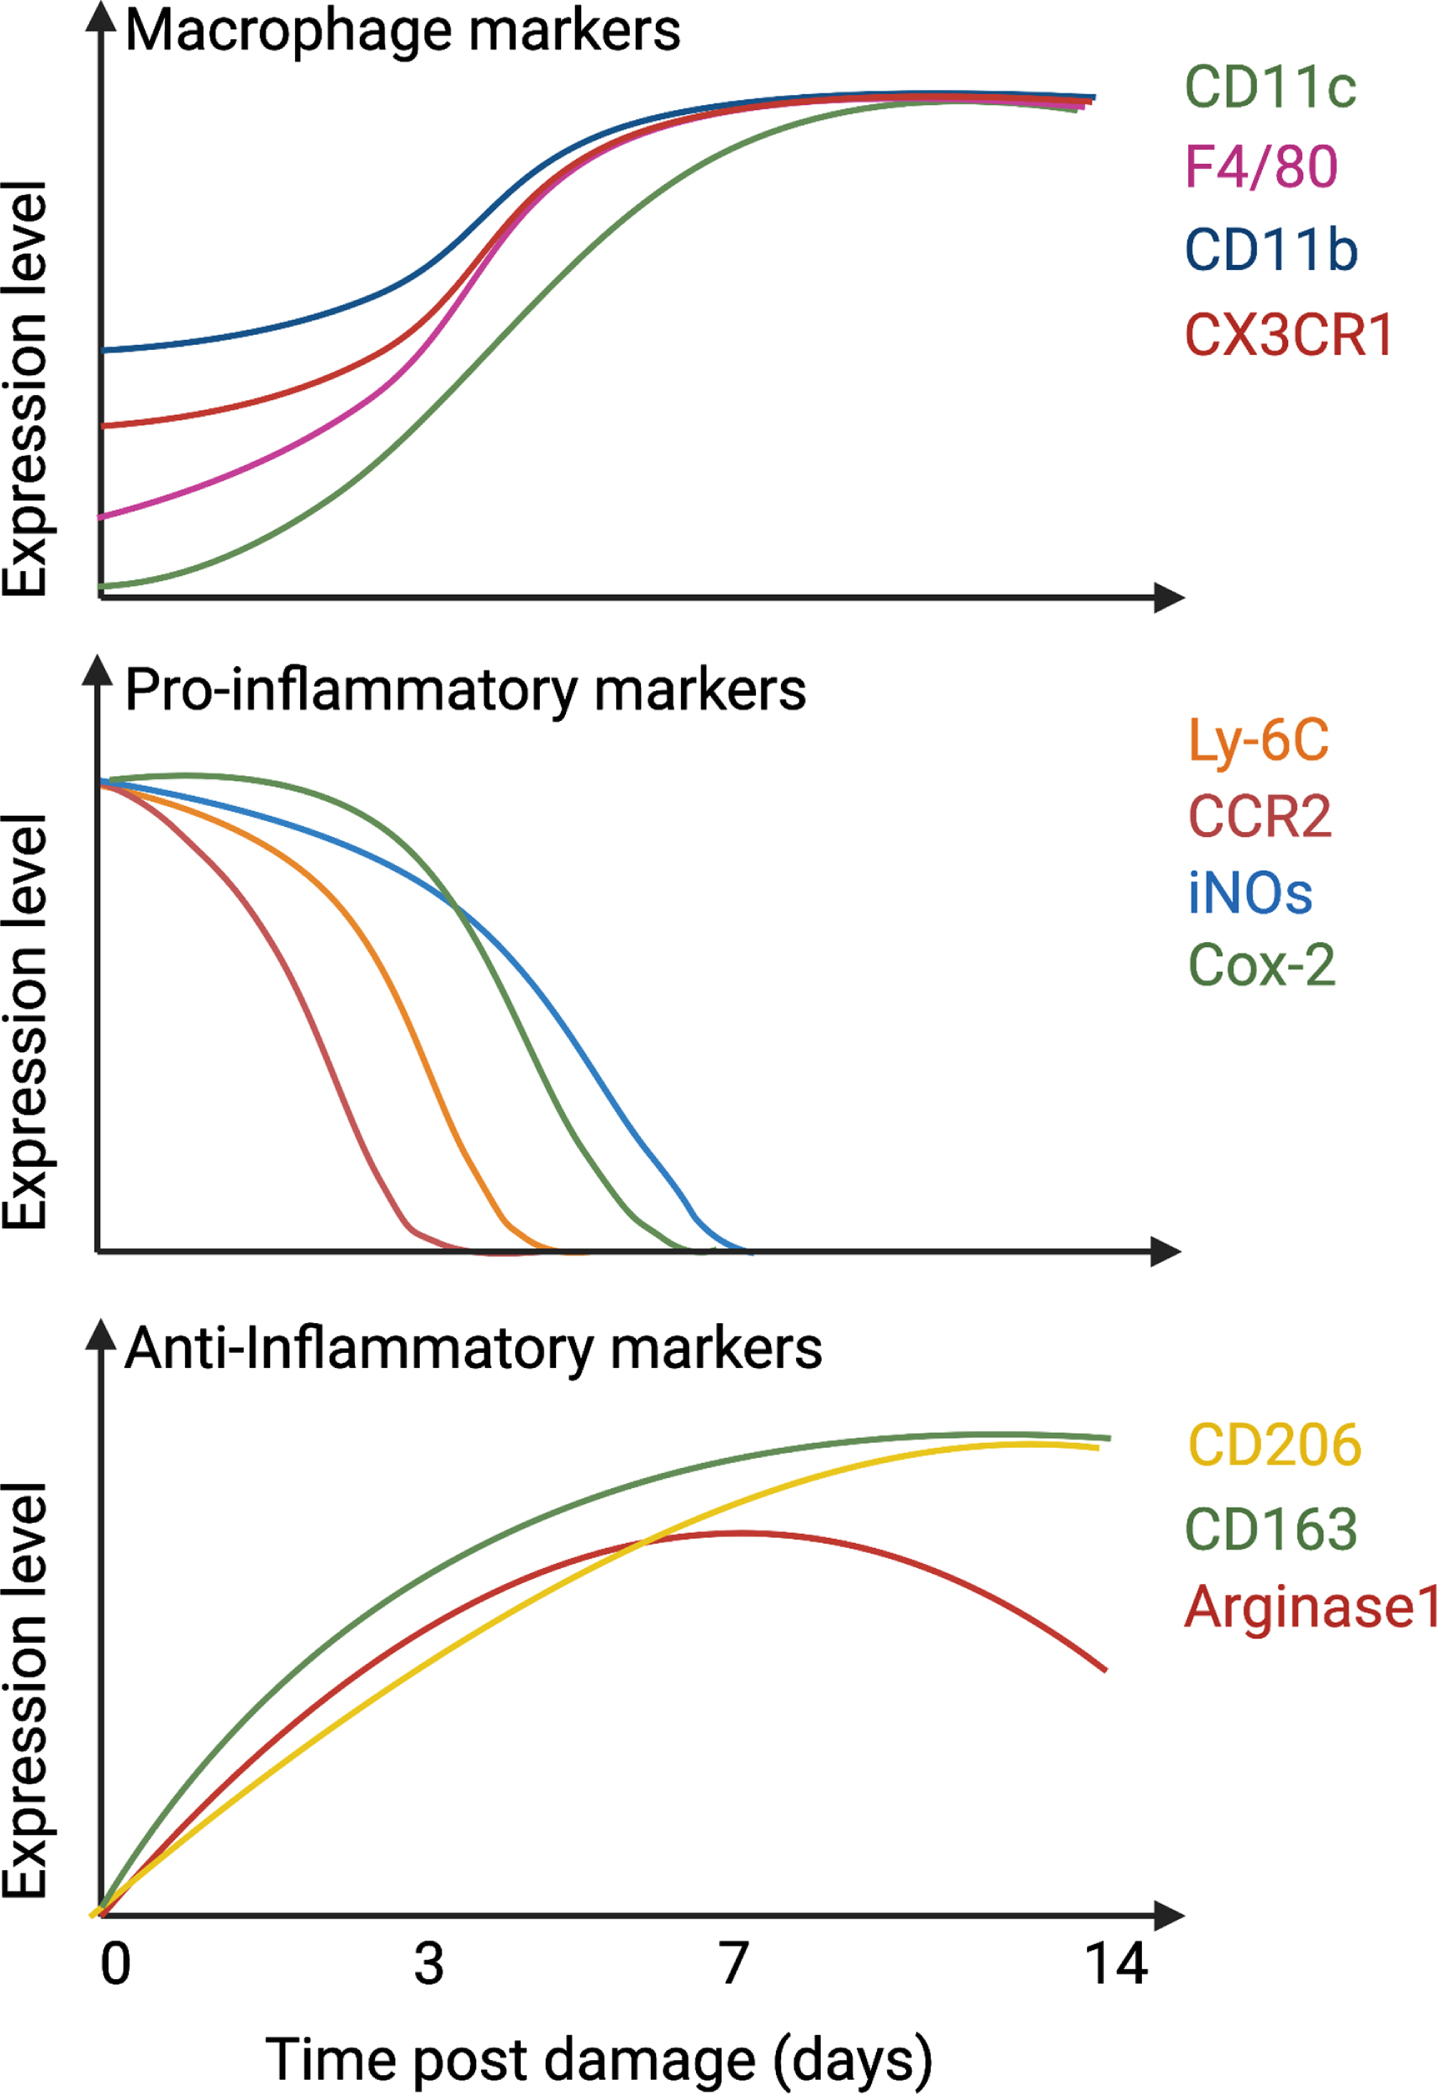 Temporal expression of macrophage and inflammatory markers. After damage, infiltrated monocytes differentiate into macrophages, up-regulate CD11c, CD11b, F4/80, and CX3CR1 (top graph) and express pro-inflammatory markers such as Ly-6C, CCR2, iNOs, and Cox-2 (middle graph). After 1-2 days in the tissue, they downregulate pro-inflammatory markers and start to express anti-inflammatory proteins such as CD206, CD163, and Arginase 1 (bottom graph).